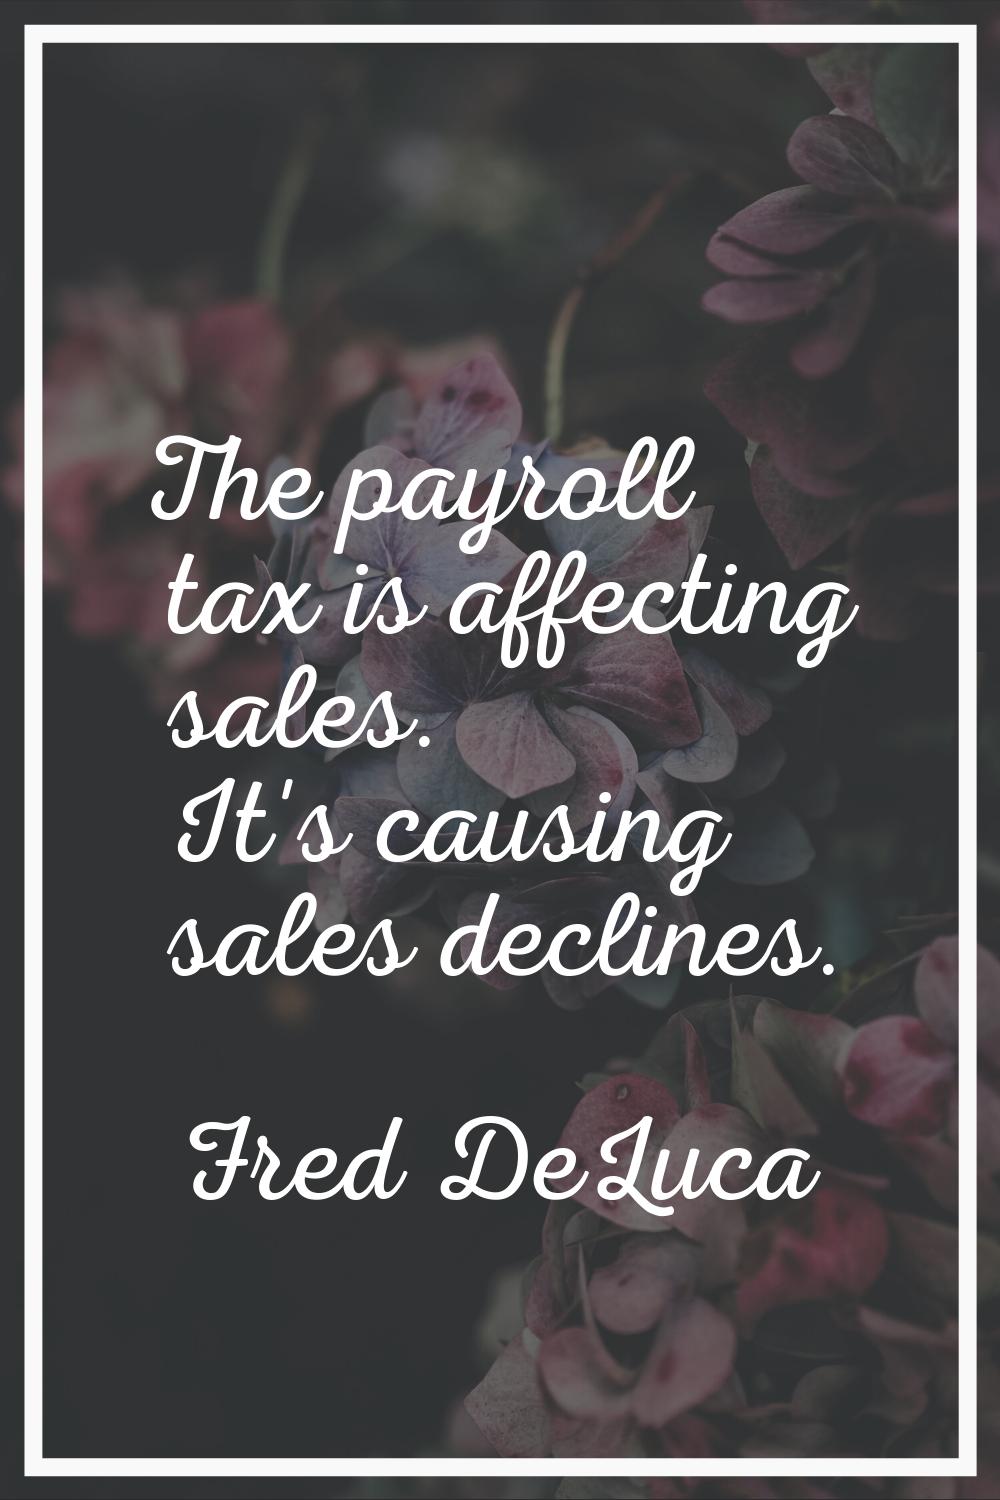 The payroll tax is affecting sales. It's causing sales declines.